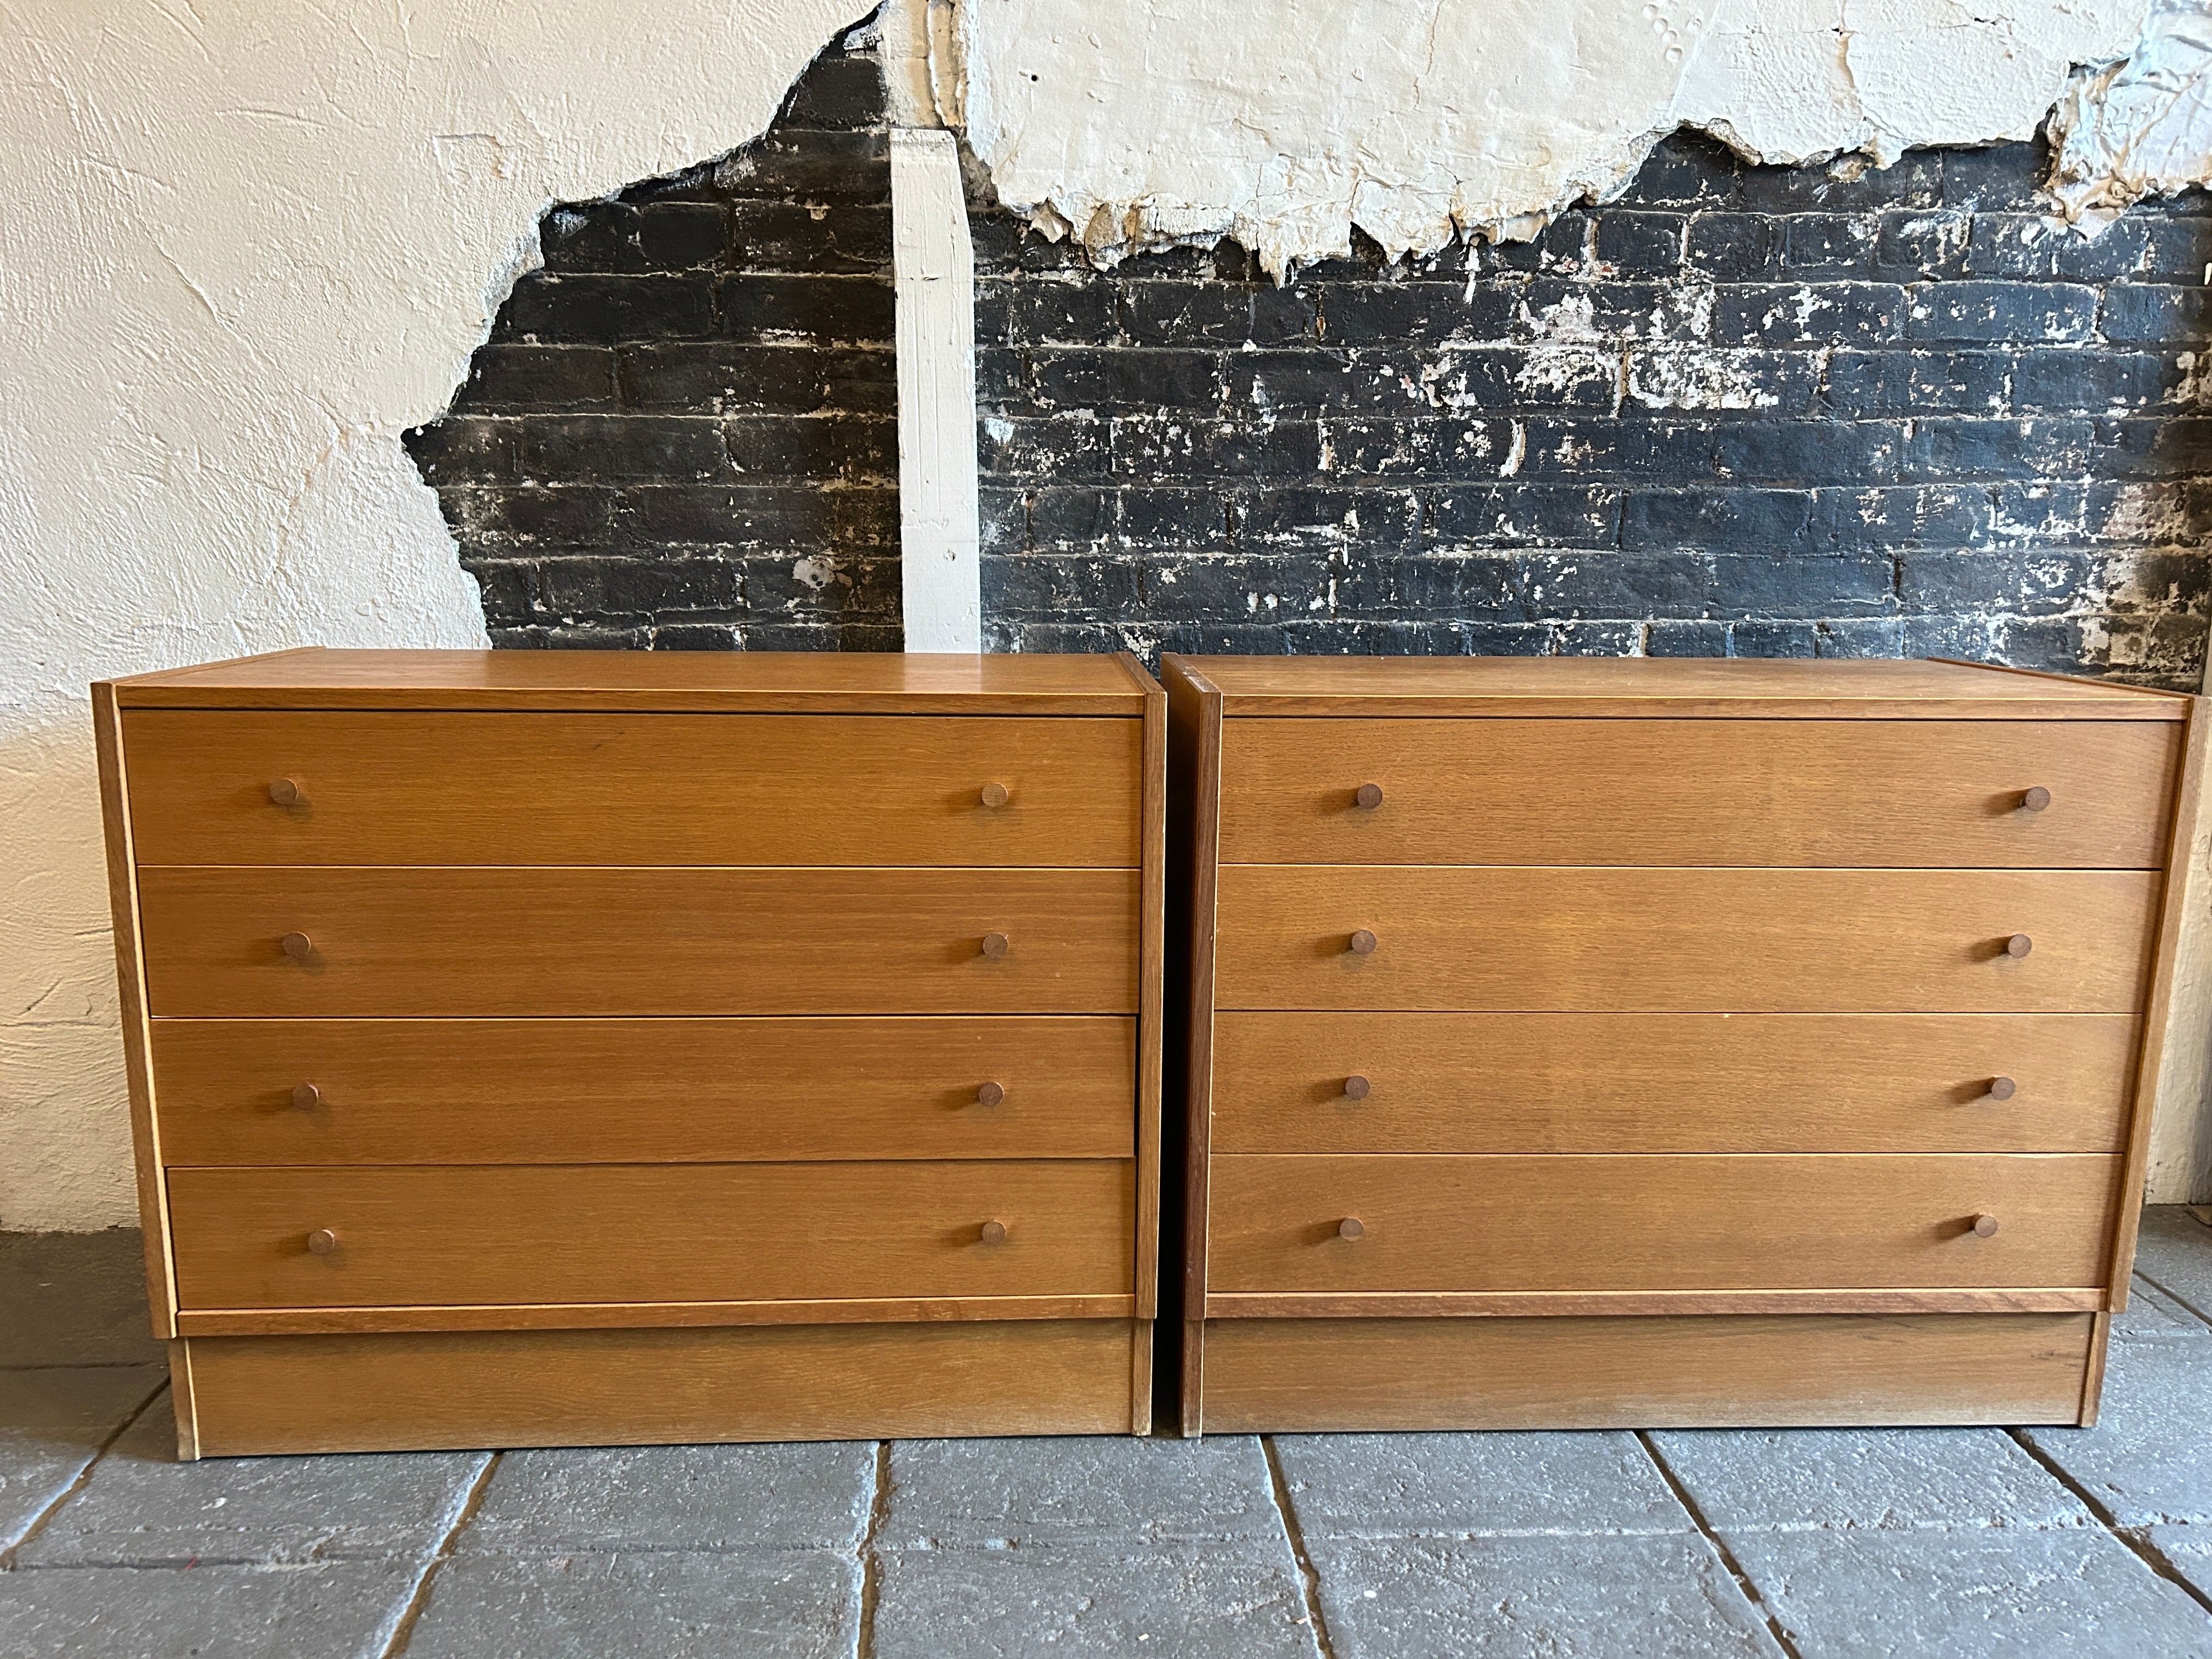 Pair of Mid-Century Modern danish 4 drawer dressers in light teak laminate with tapered teak pulls. Clean inside and out all drawers slide smooth. Get pair of small dressers. Located in Brooklyn NYC

Sold as a set of (2) 1 pair 

Measurements